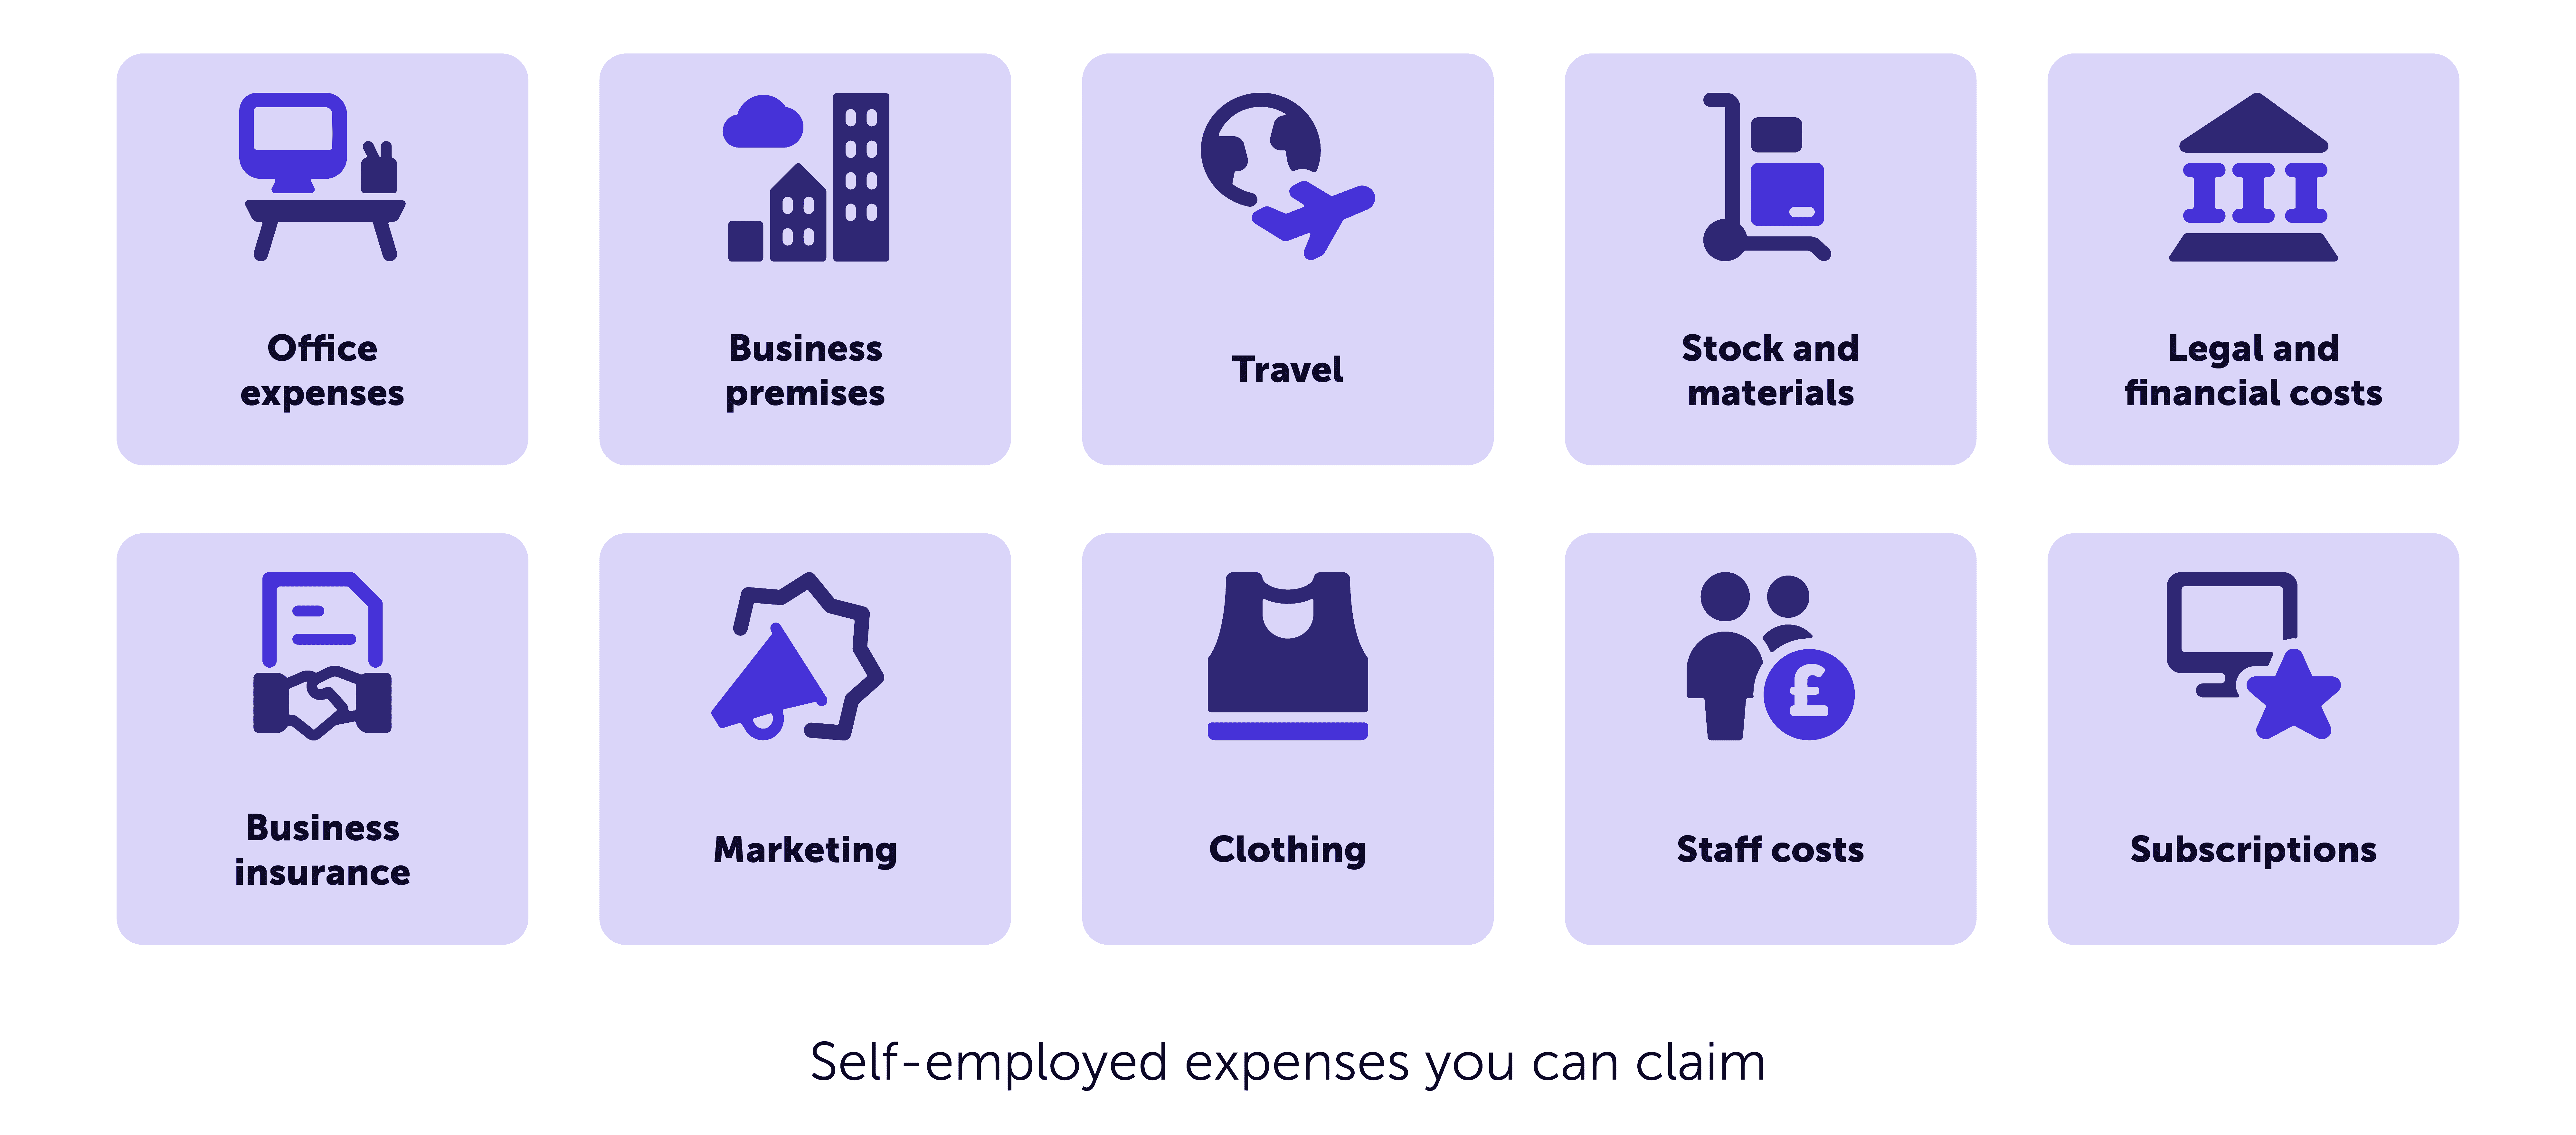 Simply Business graphic showing types of self-employed expenses